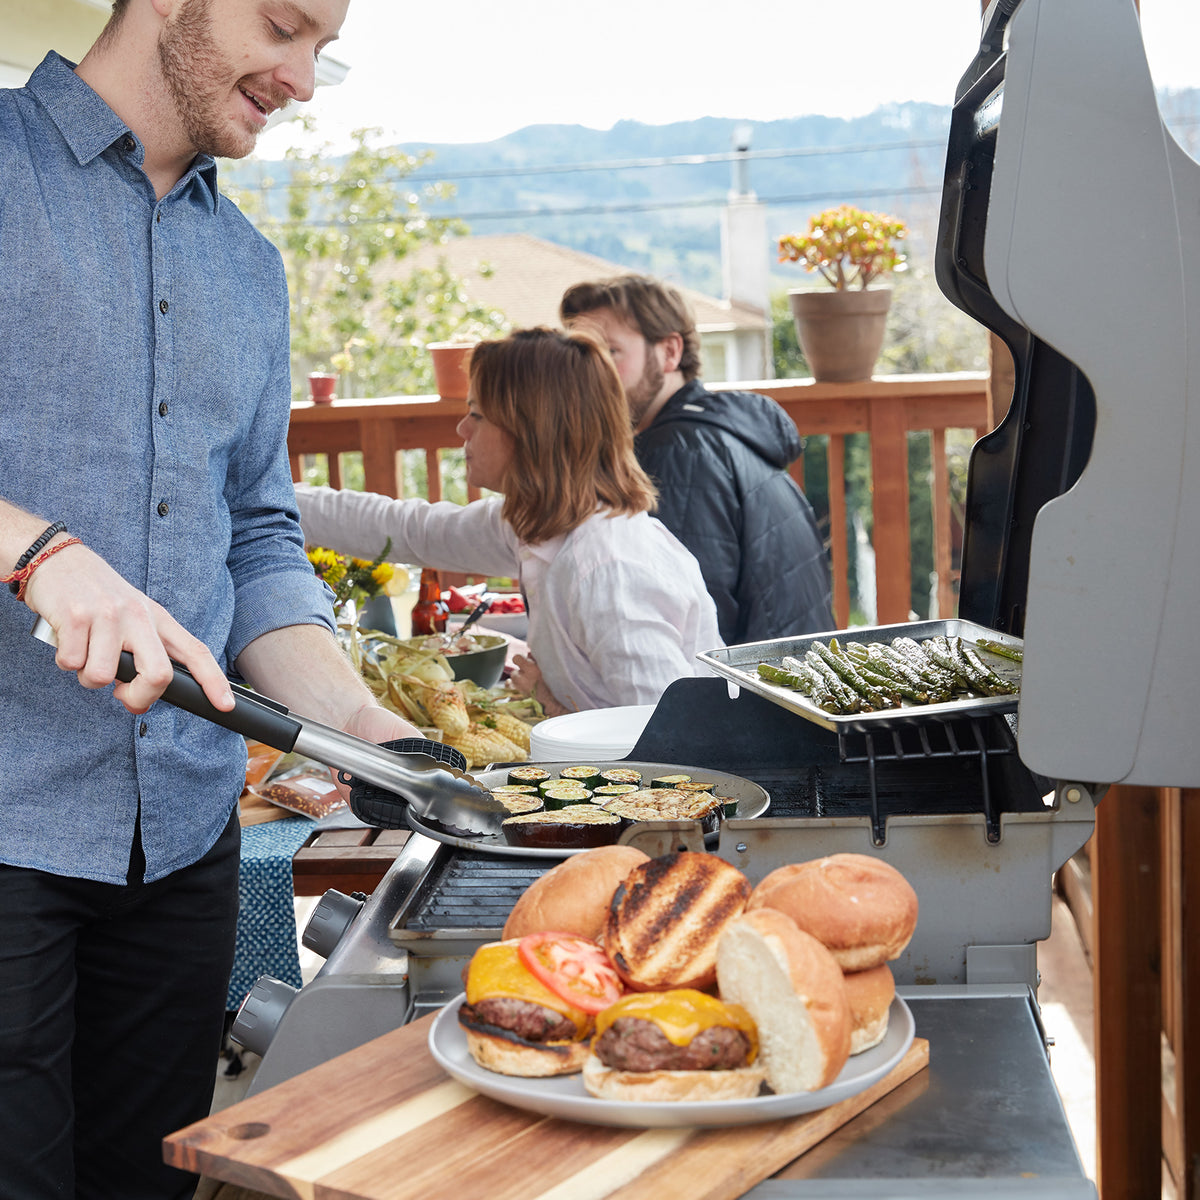 Lifestyle photo, a man using the grill tongs to transfer roasted vegetable slices from the grill to a serving platter, while guests in the background enjoy the barbeque.